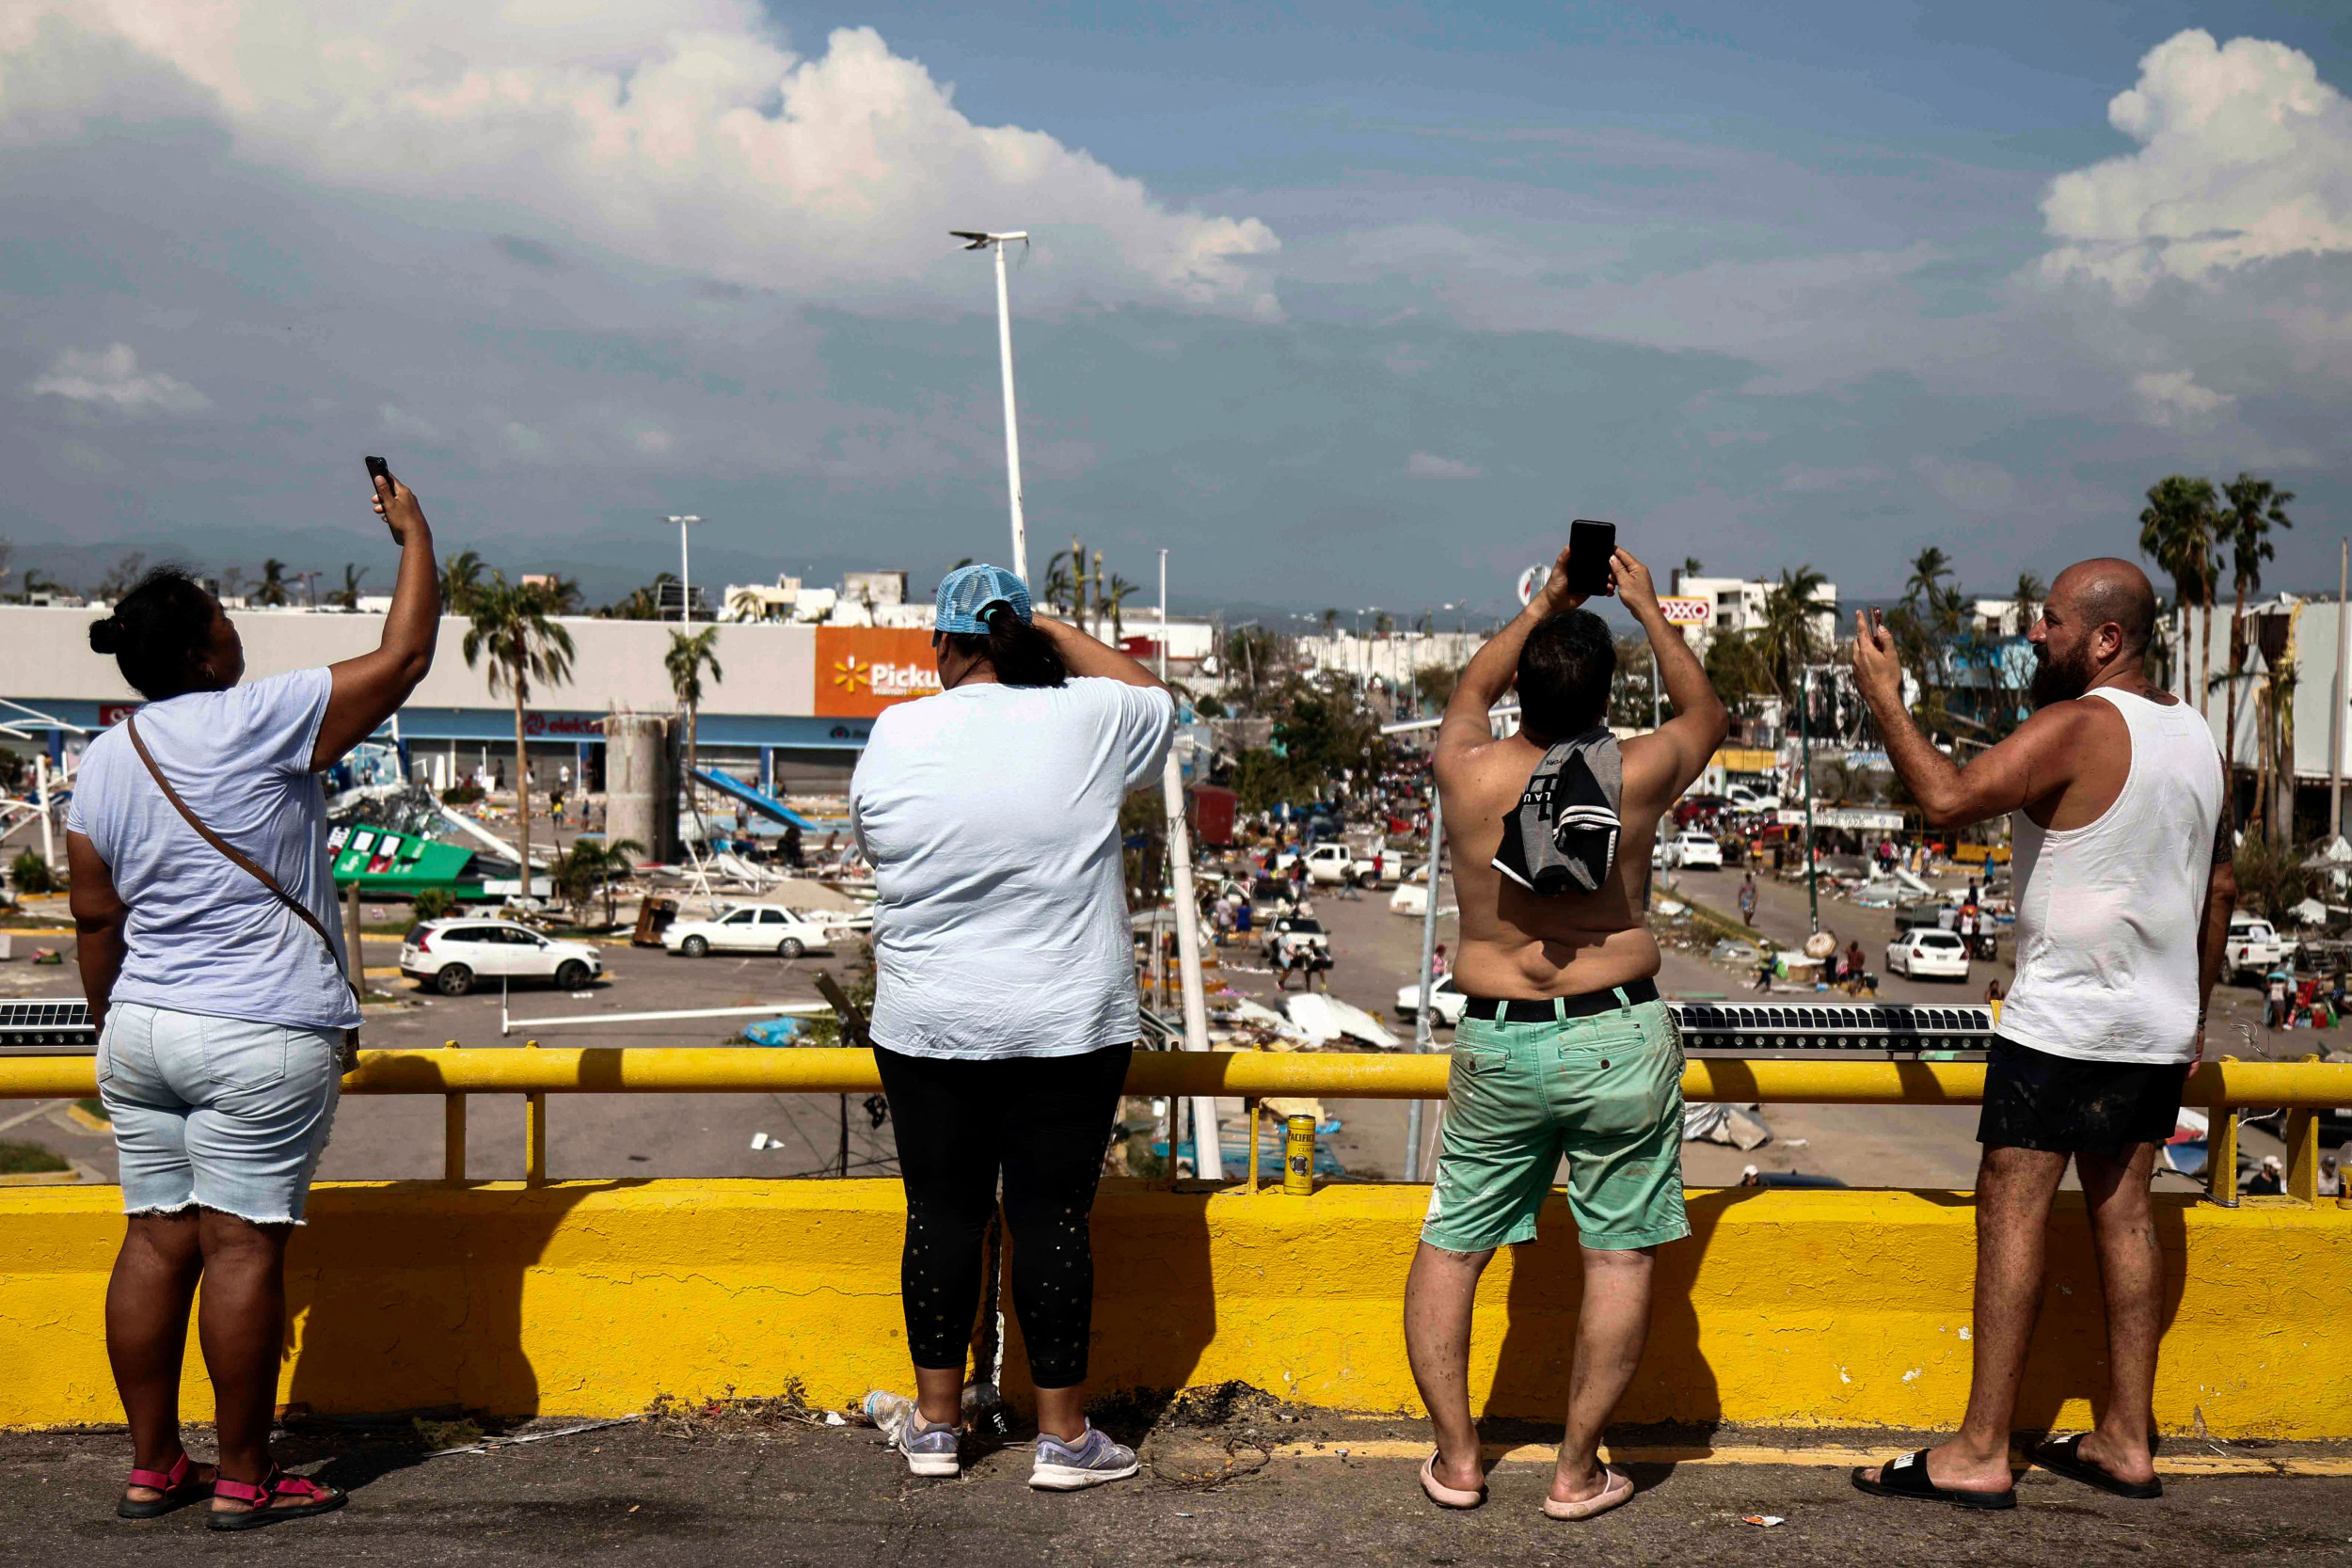 Much of Acapulco still without power as Hurricane Otis death toll rises